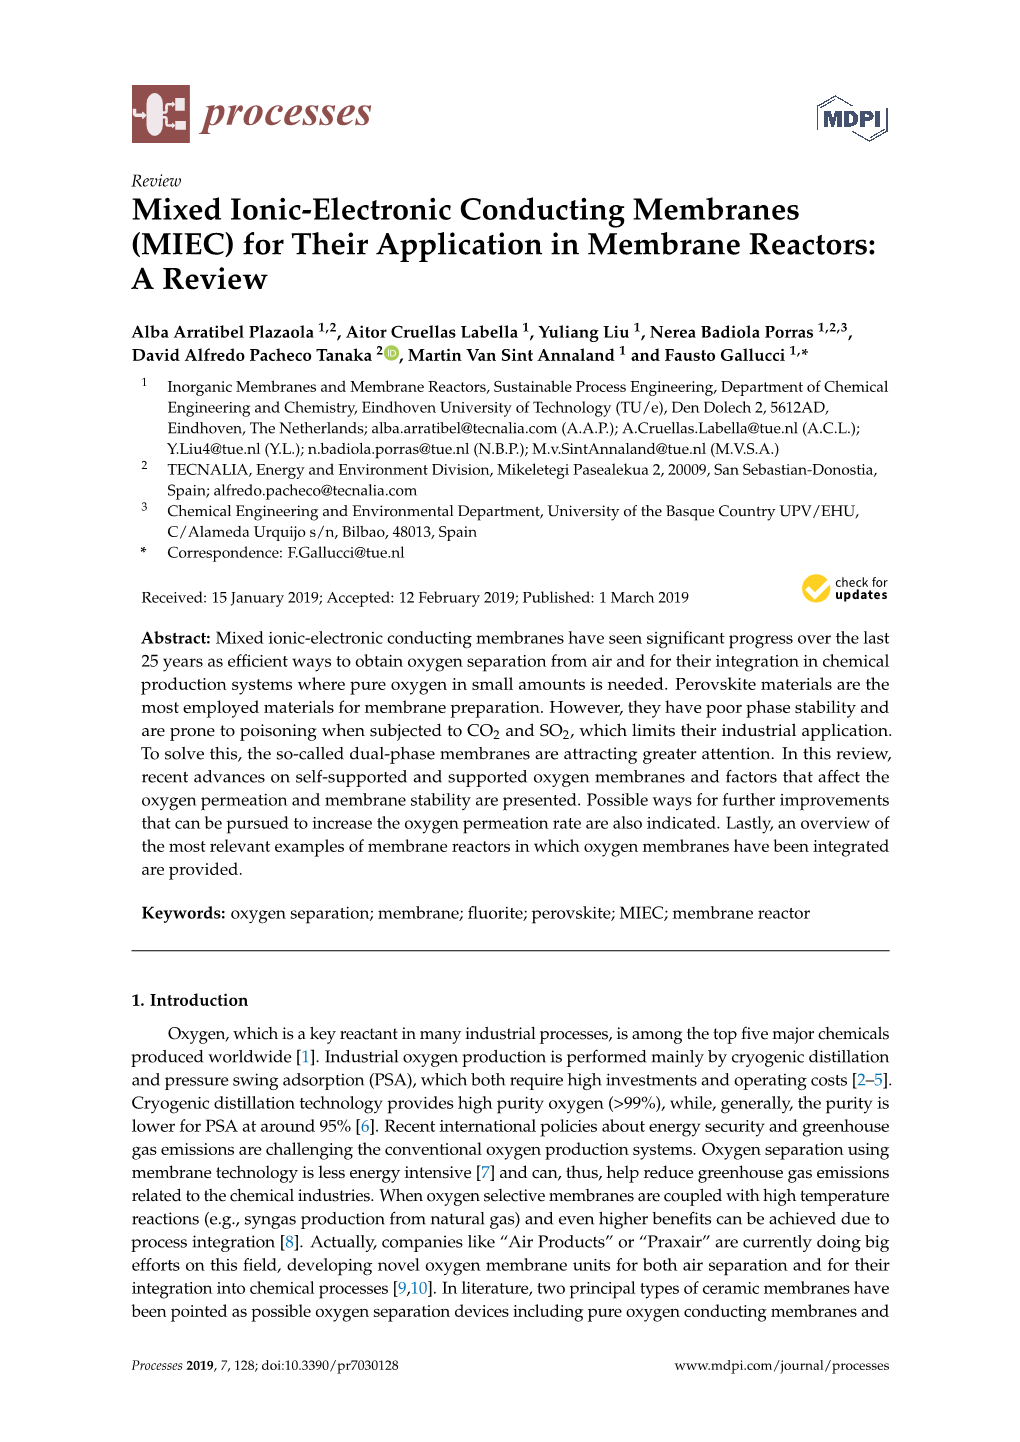 Mixed Ionic-Electronic Conducting Membranes (MIEC) for Their Application in Membrane Reactors: a Review